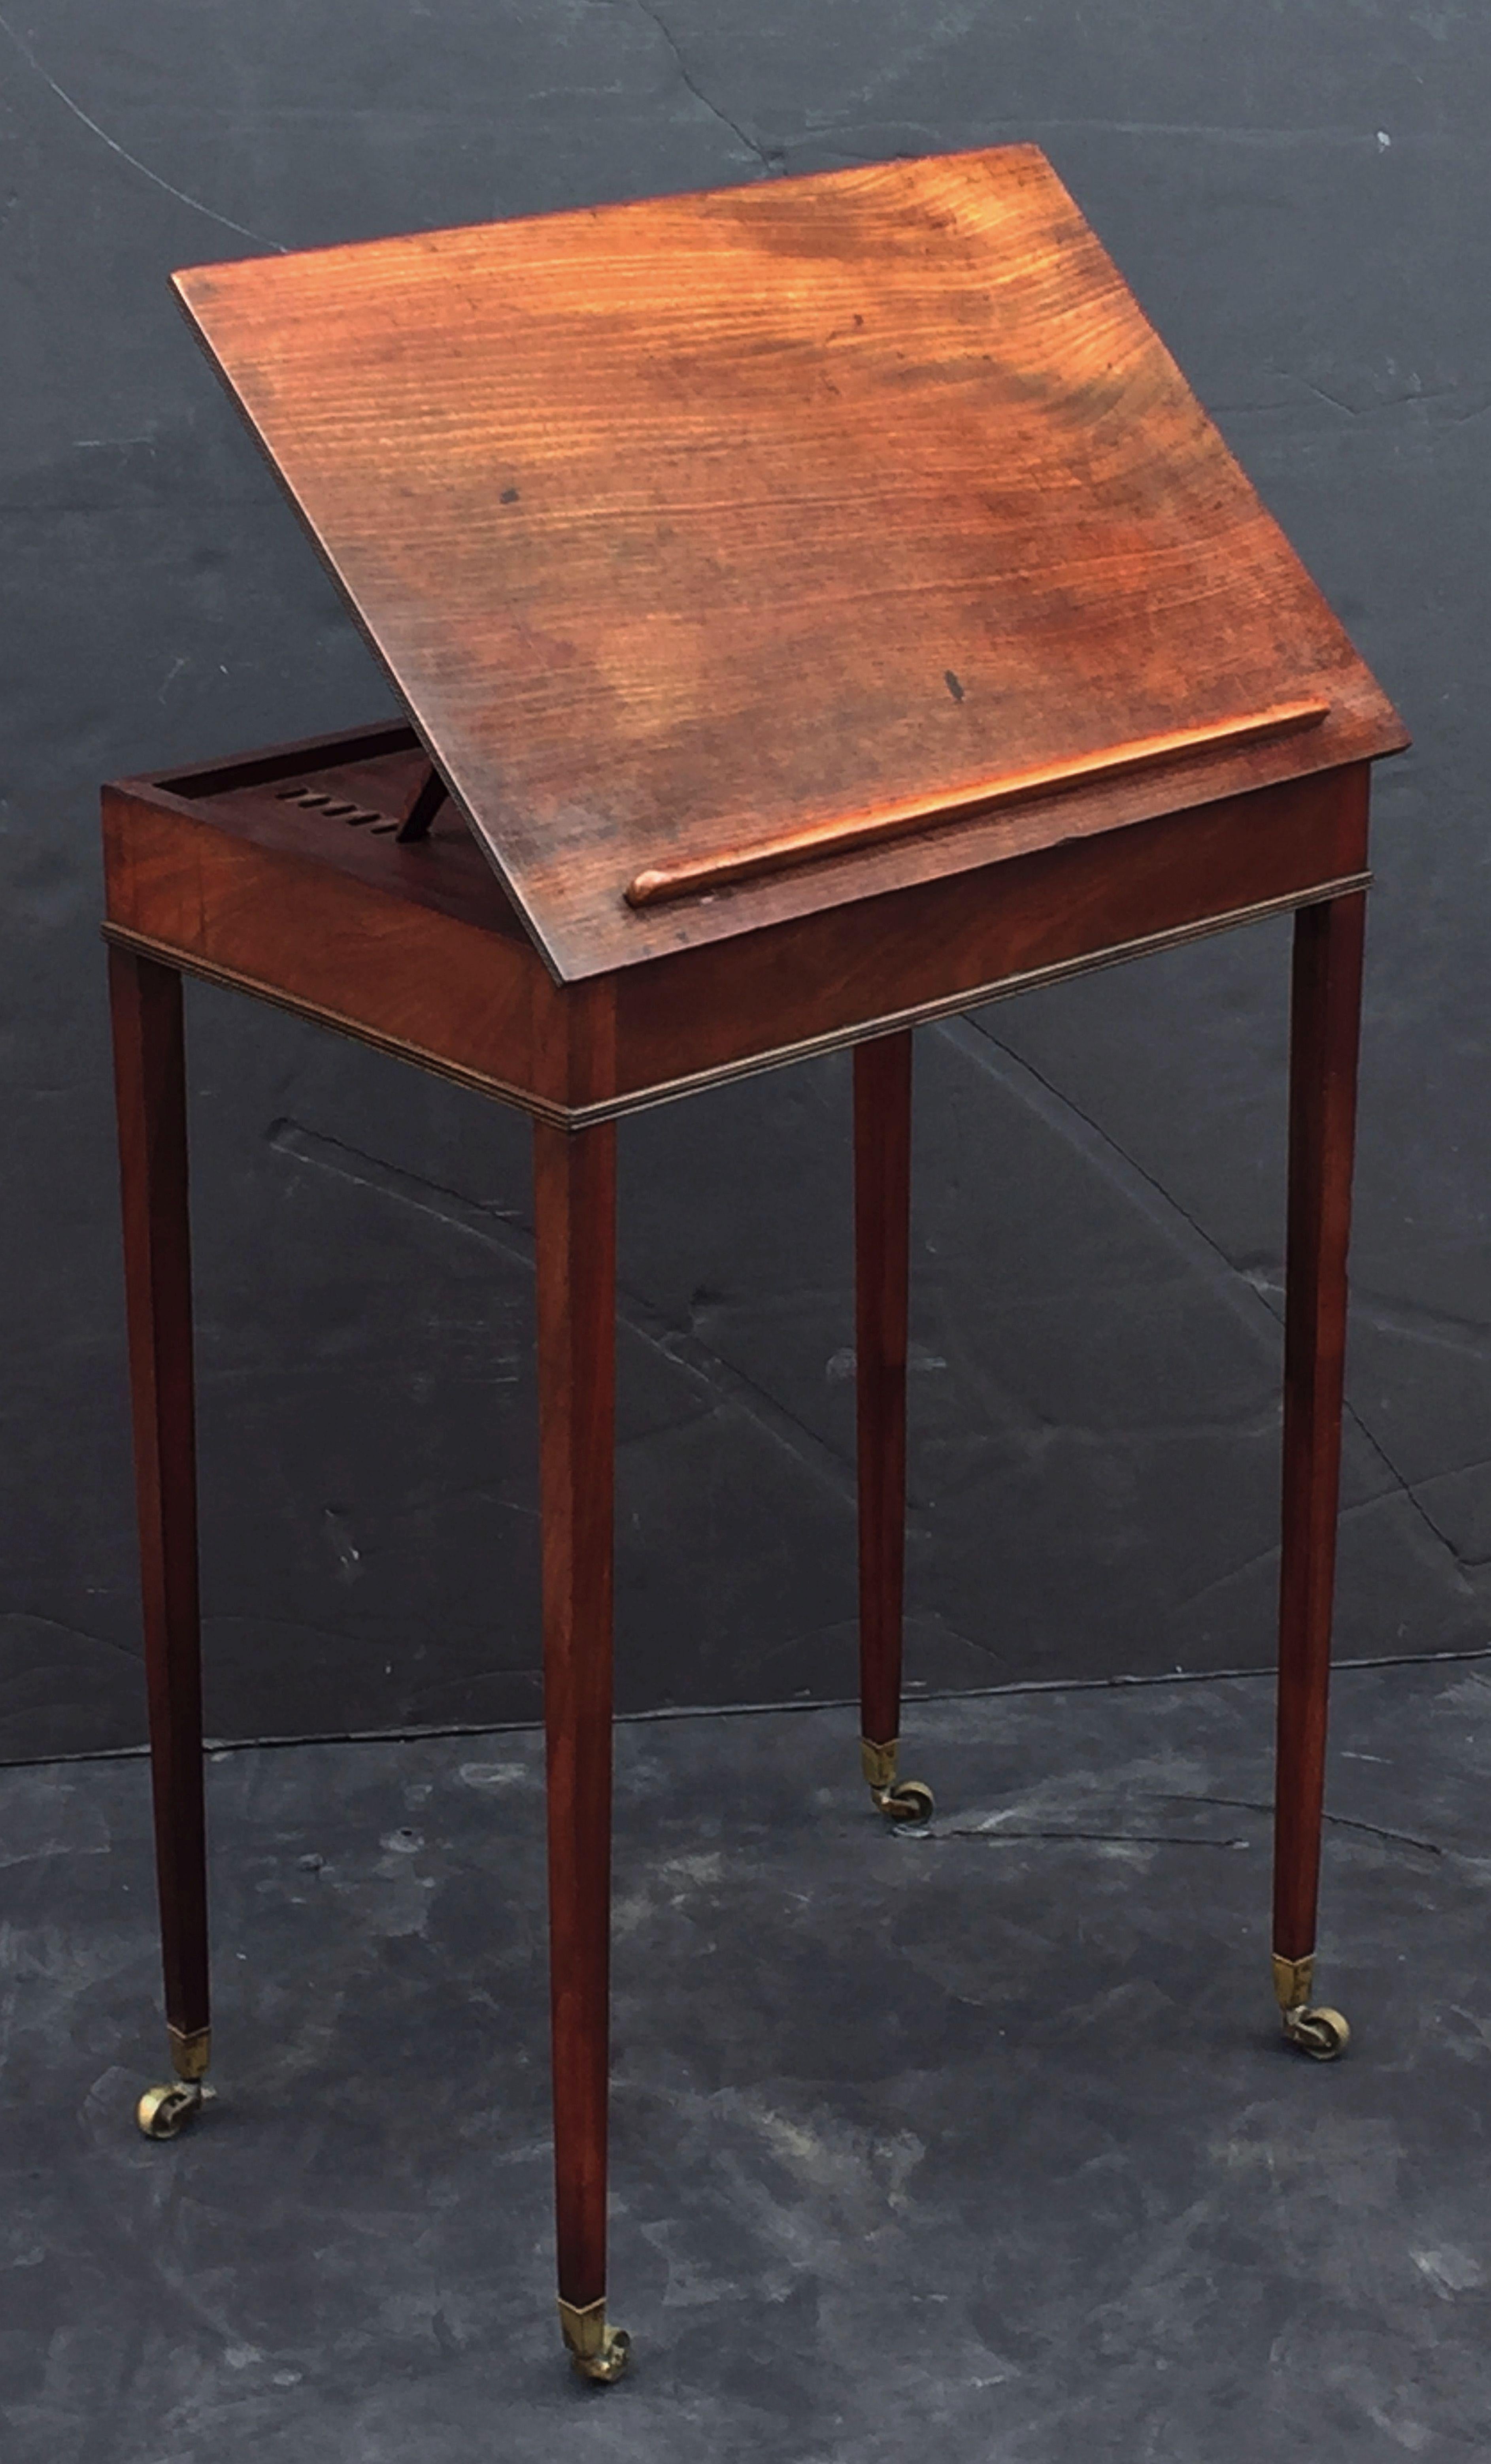 A fine English architect's drawing table of mahogany from the Georgian Era, featuring a moulded slope top with adjustable height stand and brass locking hardware on back, mounted to a cabinet desk frieze with one fitted side drawer and brass